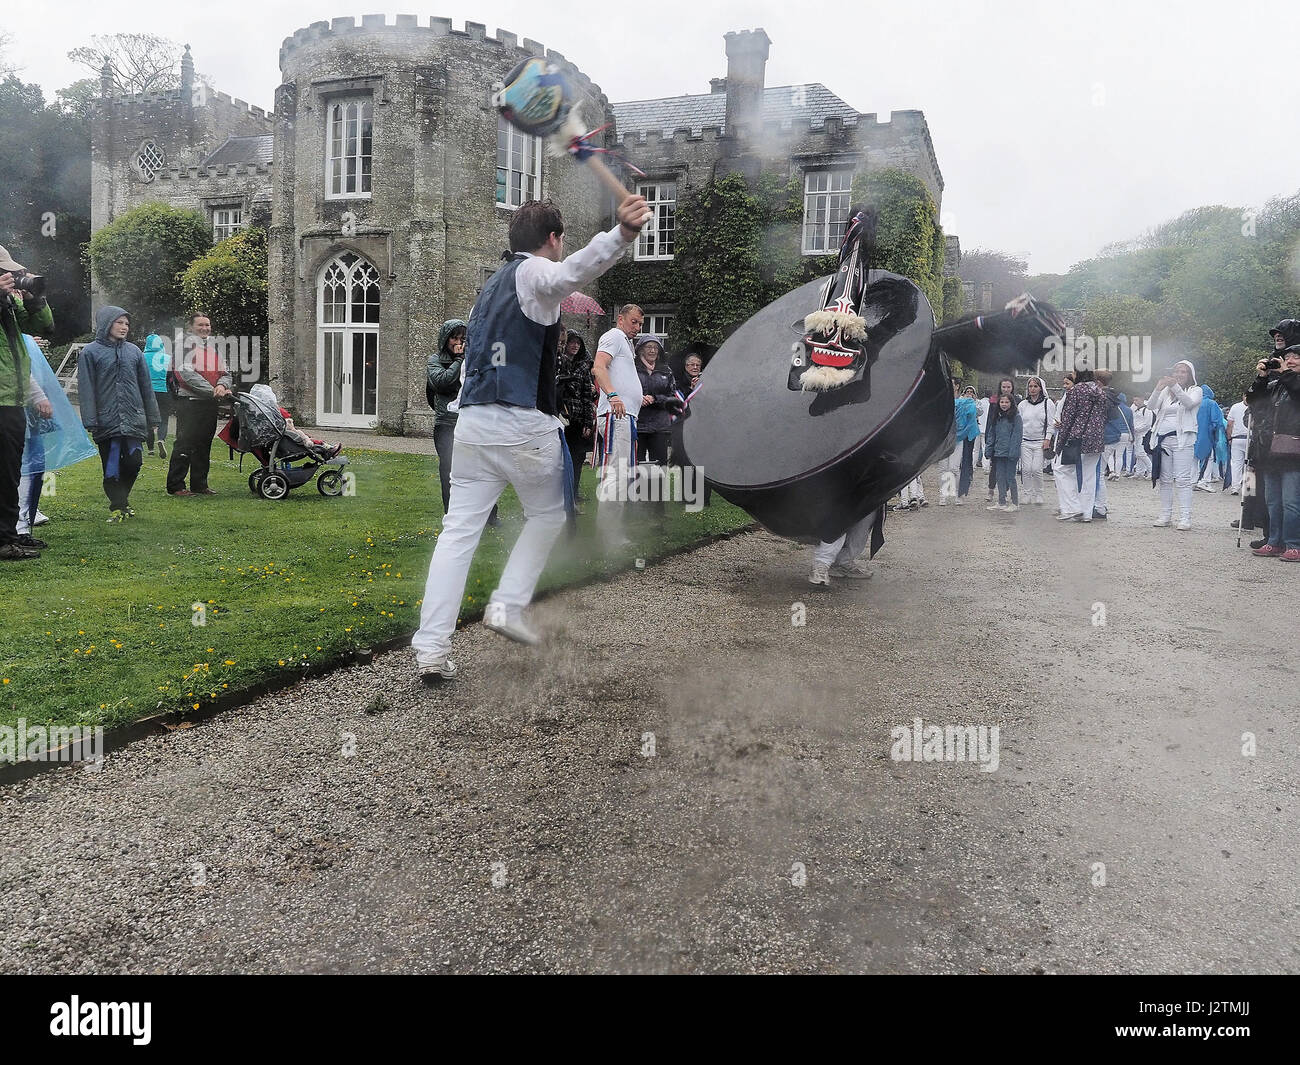 May day, Padstow, Cornwall, UK, 1st May,2017. Beltane Obby Oss festivities with dancing through streets accompanied by drummers and accordians. Traditionally only  Padstonians born in the seaside town may join in the processions.  Padstow, Cornwall, UK.  Robert Taylor/Alamy Live News Stock Photo